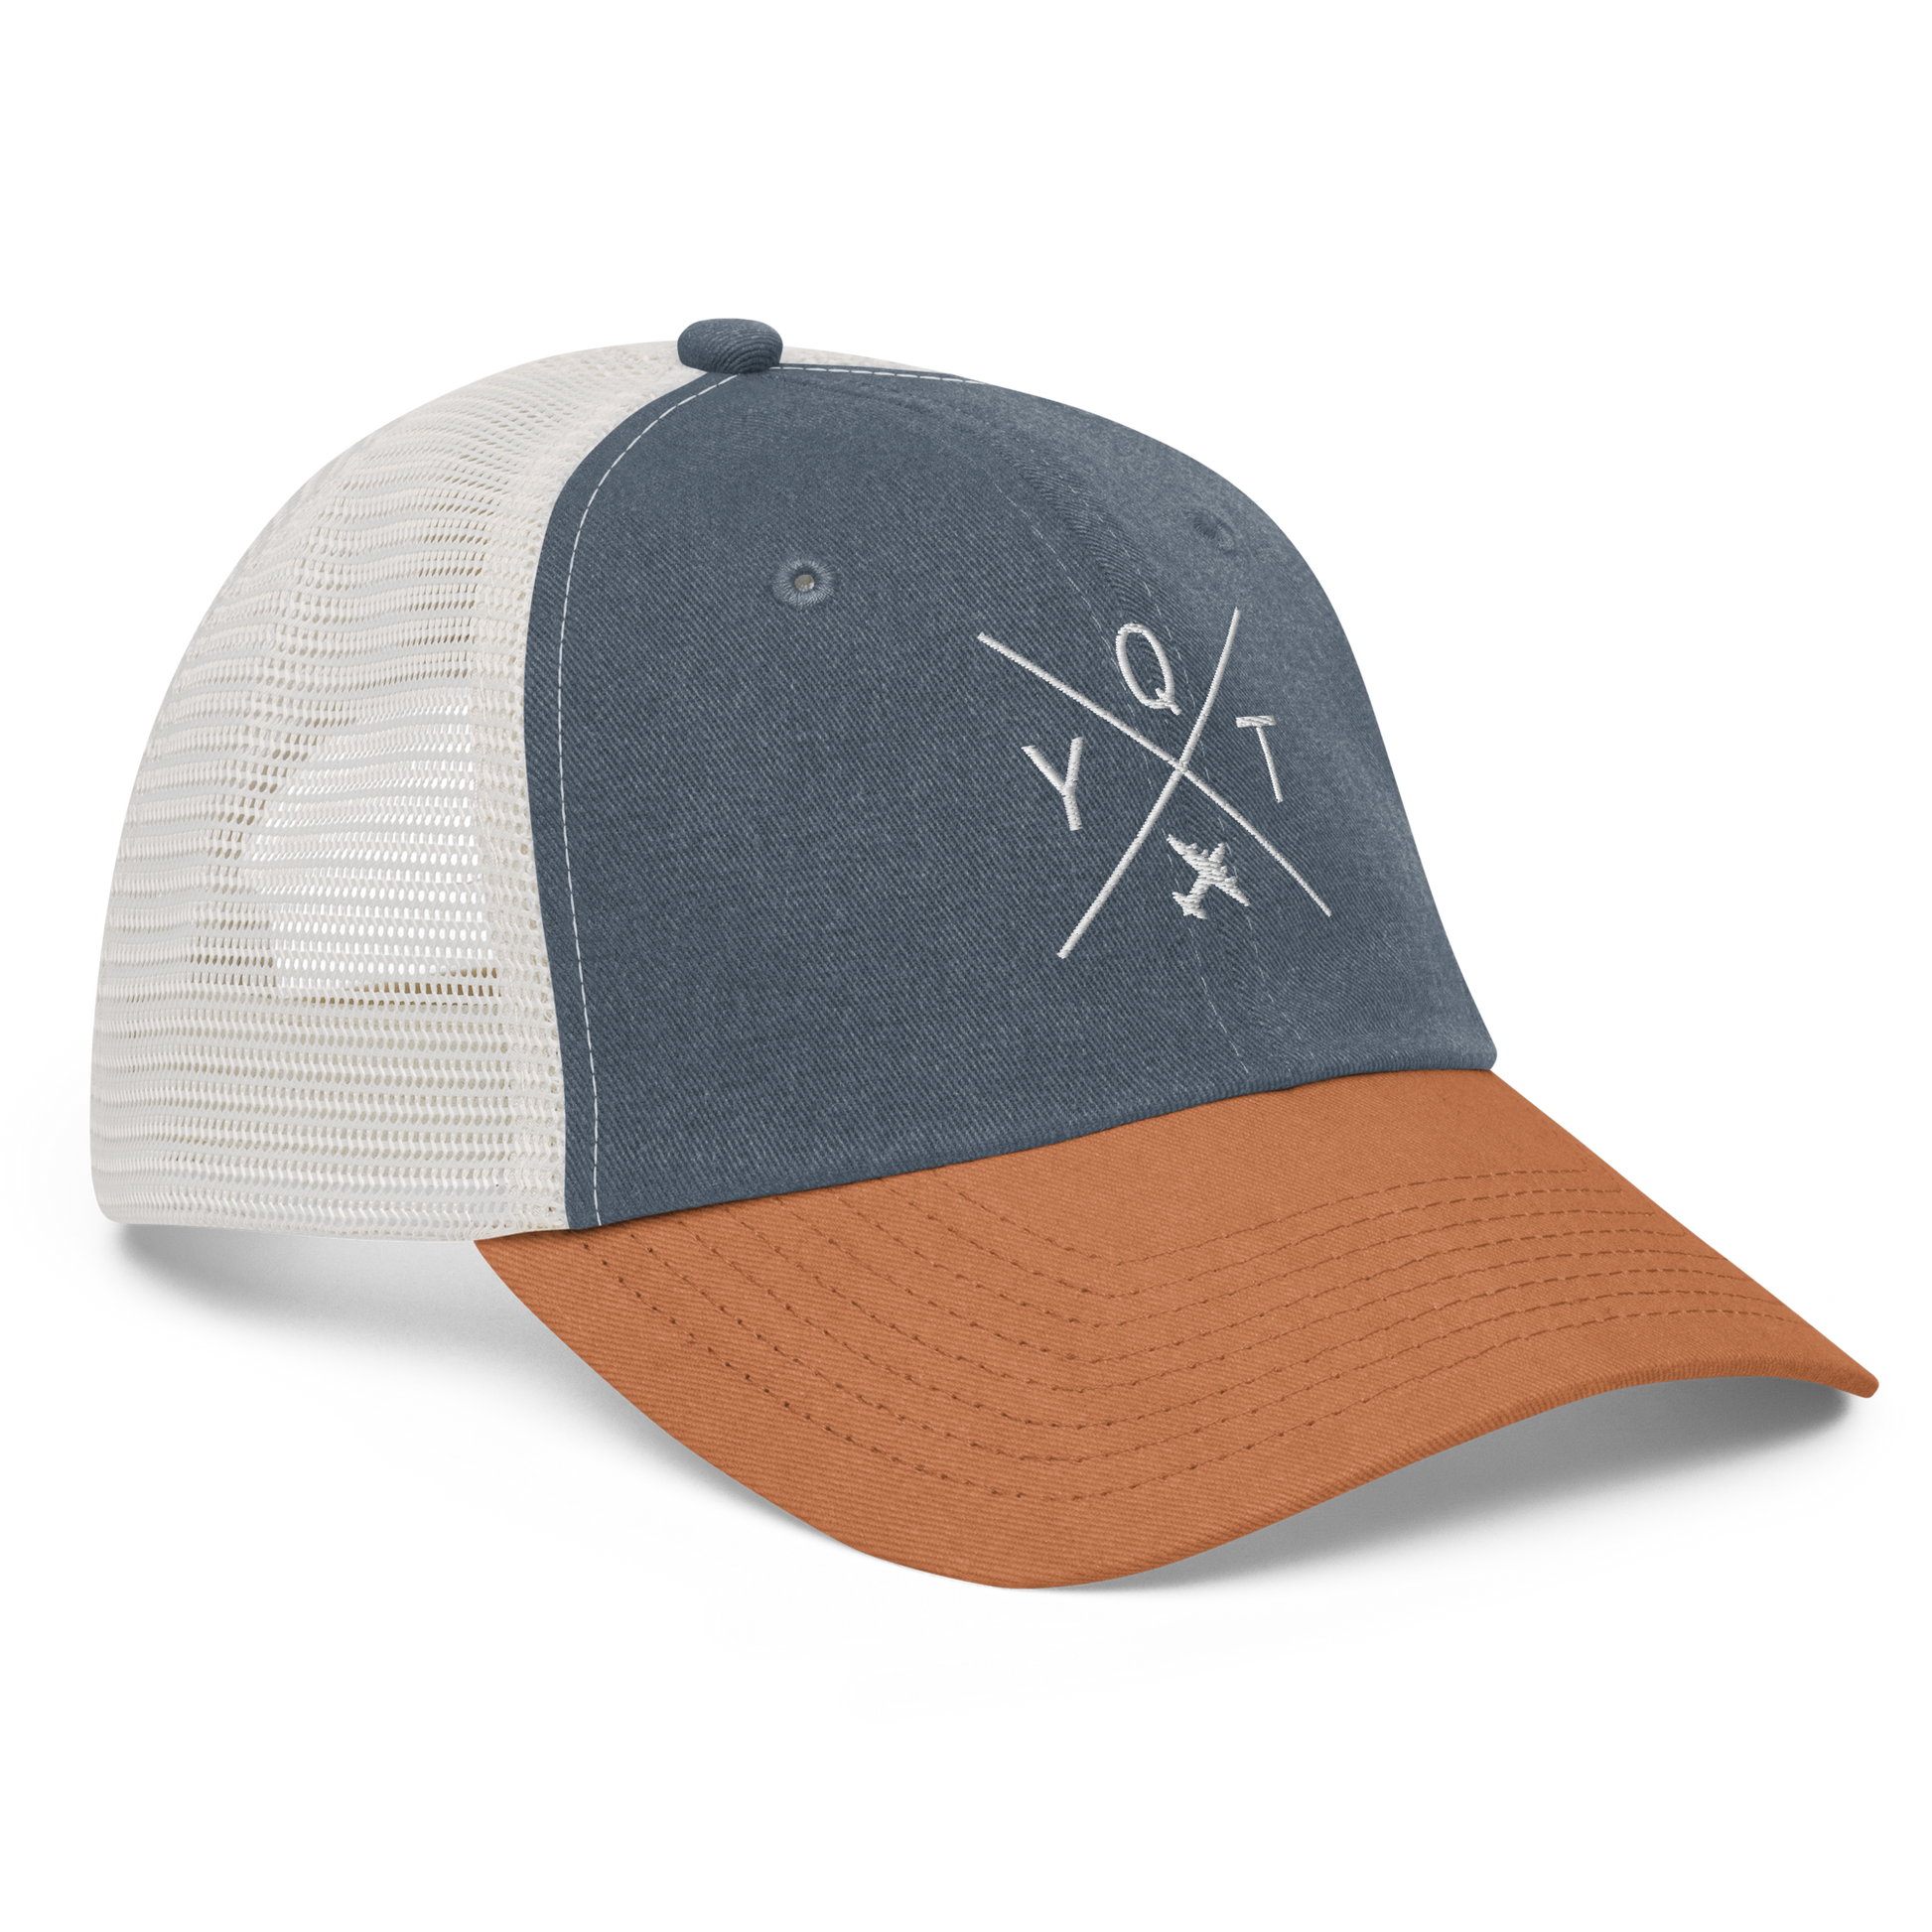 YHM Designs - YQT Thunder Bay Pigment-Dyed Trucker Cap - Crossed-X Design with Airport Code and Vintage Propliner - White Embroidery - Image 16